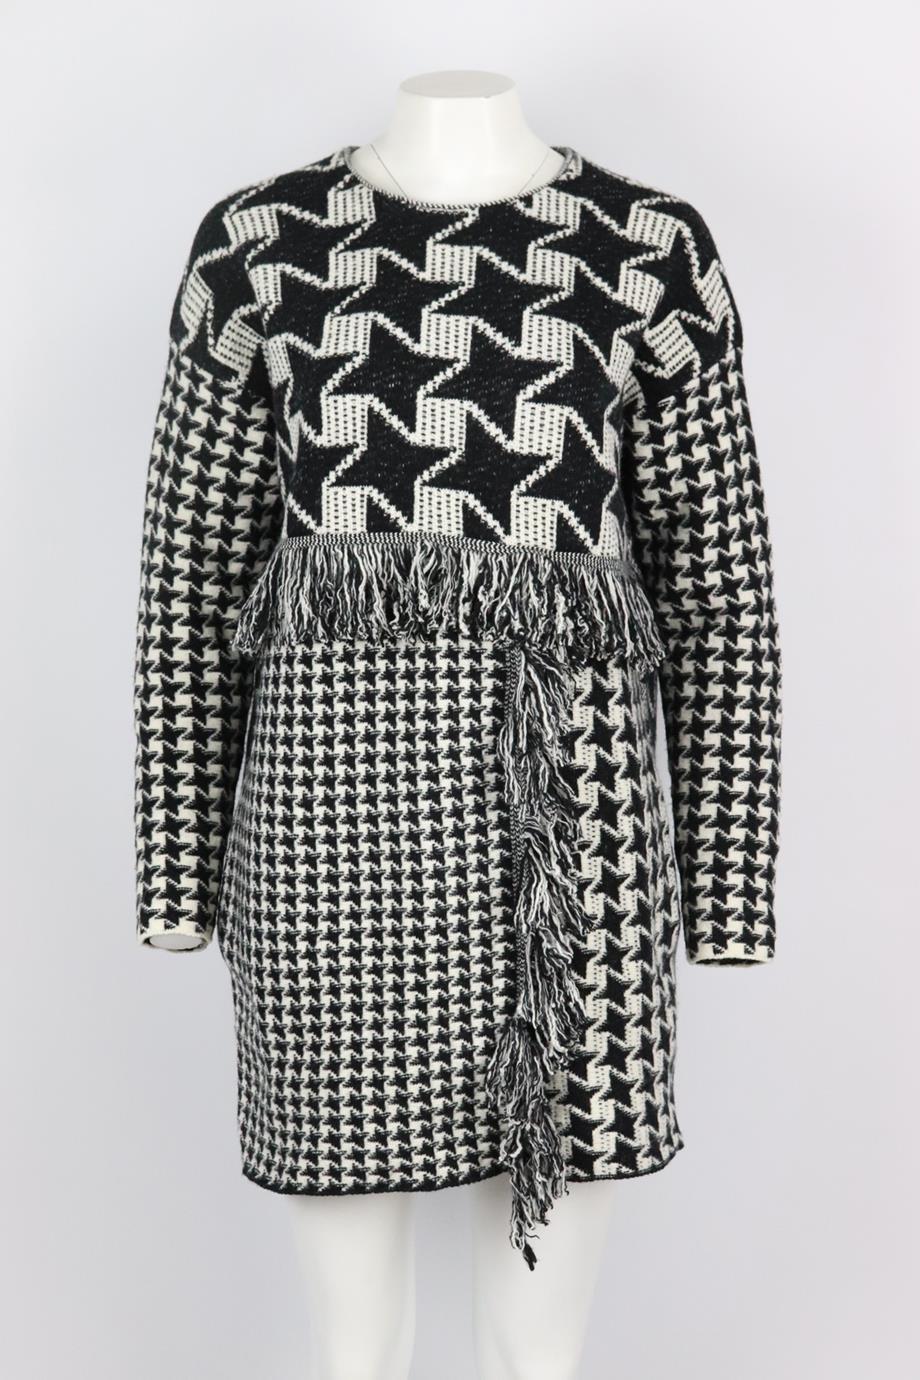 Stella McCartney fringed houndstooth wool mini dress. Black and white. Long sleeve, crewneck. Pull on. 100% Wool. Size: IT 40 (UK 8, US 4, FR 36) Bust: 45 in. Waist: 43 in. Hips: 43 in. Length: 32 in. Very good condition - Light signs of wear; see